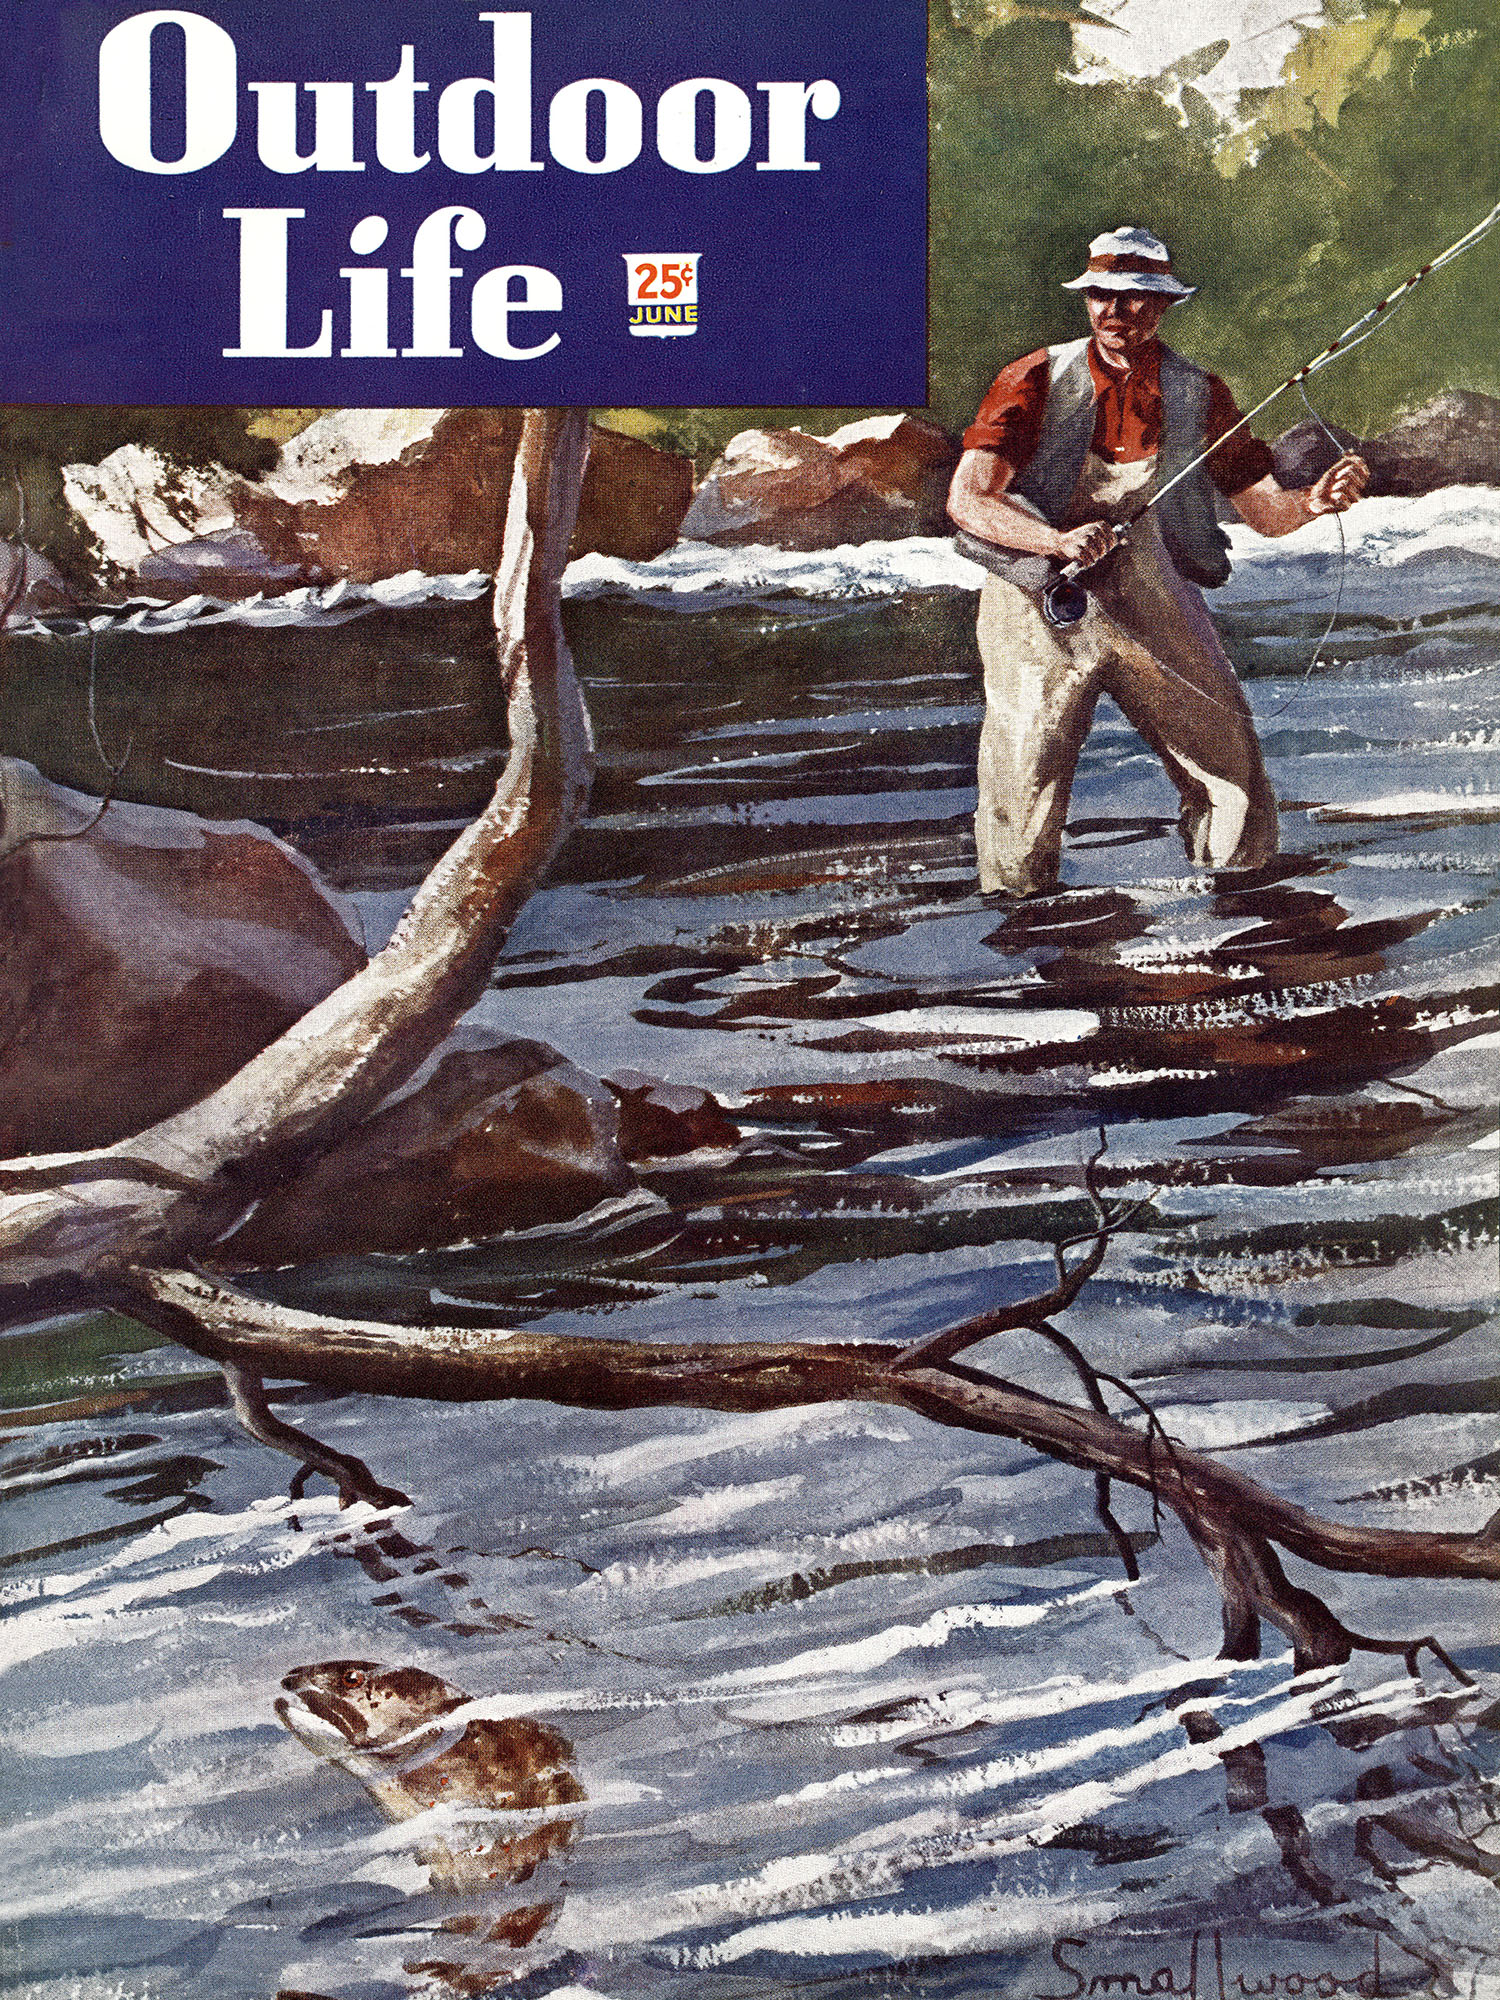 June 1948 cover of OL with fisherman and trout